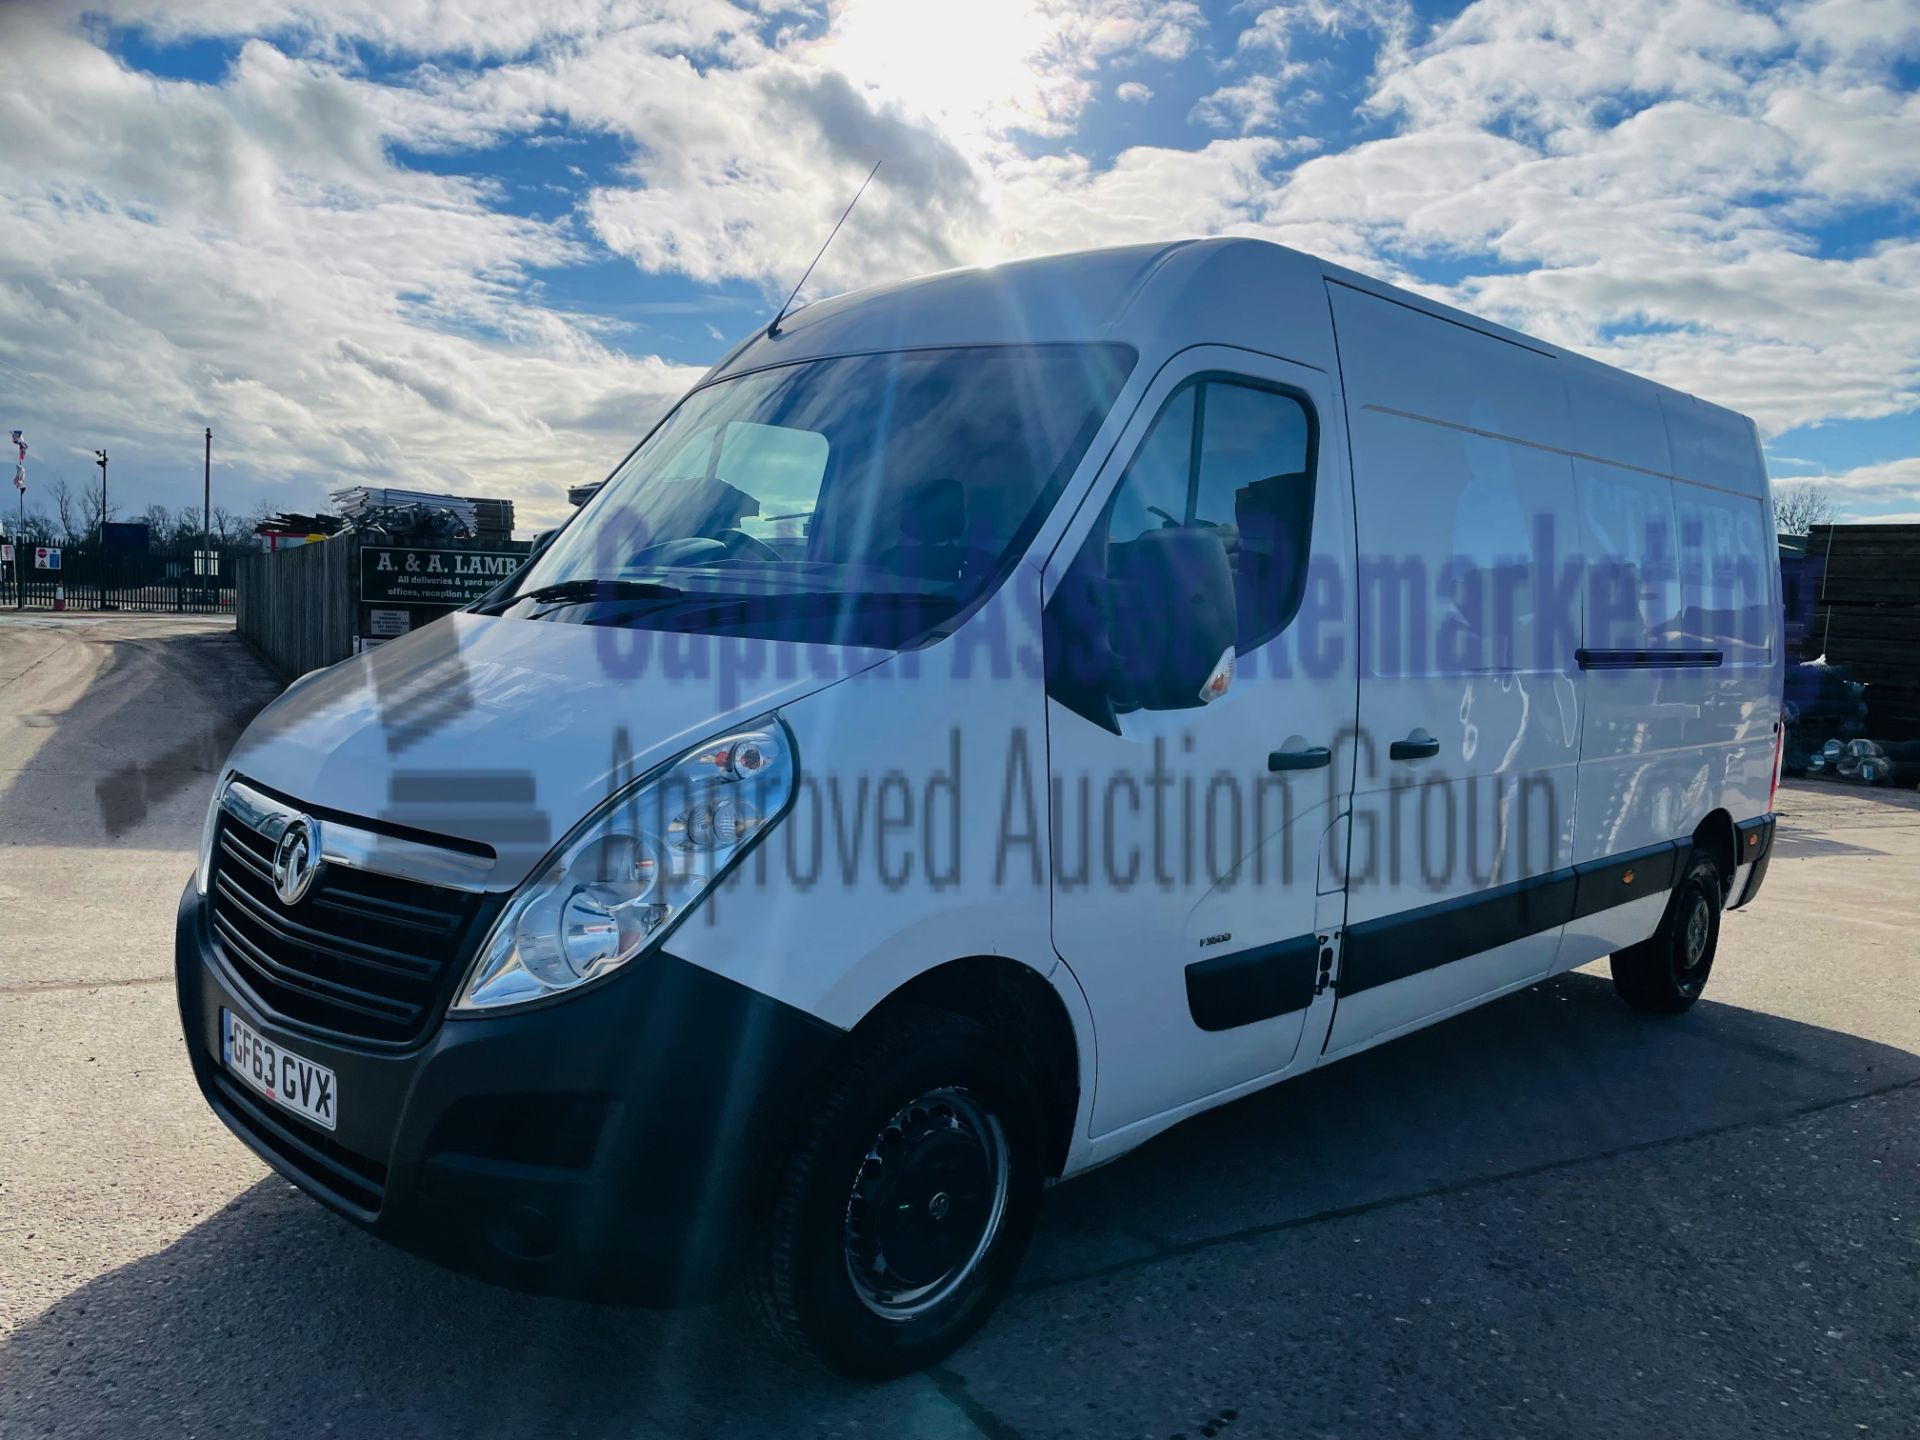 (On Sale) VAUXHALL MOVANO *LWB HI-ROOF* (63 REG) 2.3 CDTI - 6 SPEED *A/C* (1 OWNER) *NO VAT* - Image 5 of 39